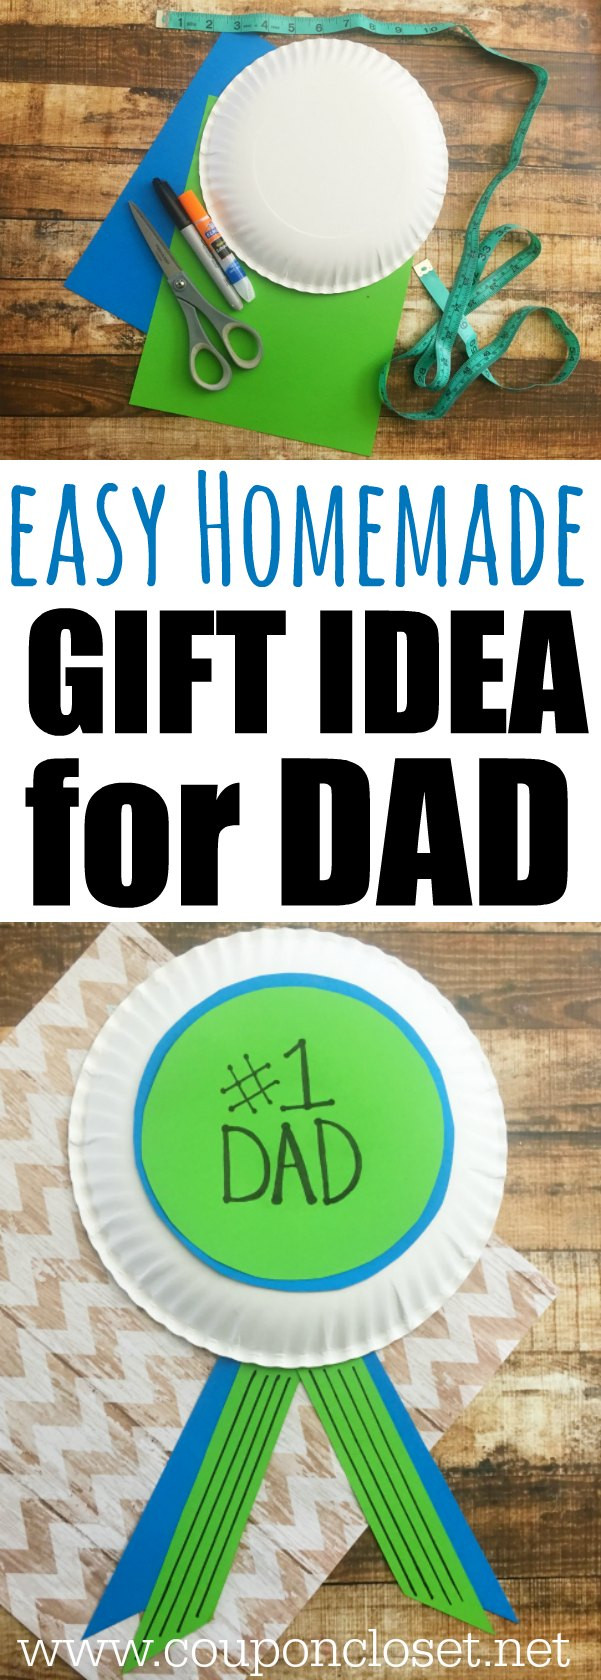 Homemade Gift Ideas For Father'S Day
 Homemade Father s Day Gift Idea 1 Dad Award e Crazy Mom